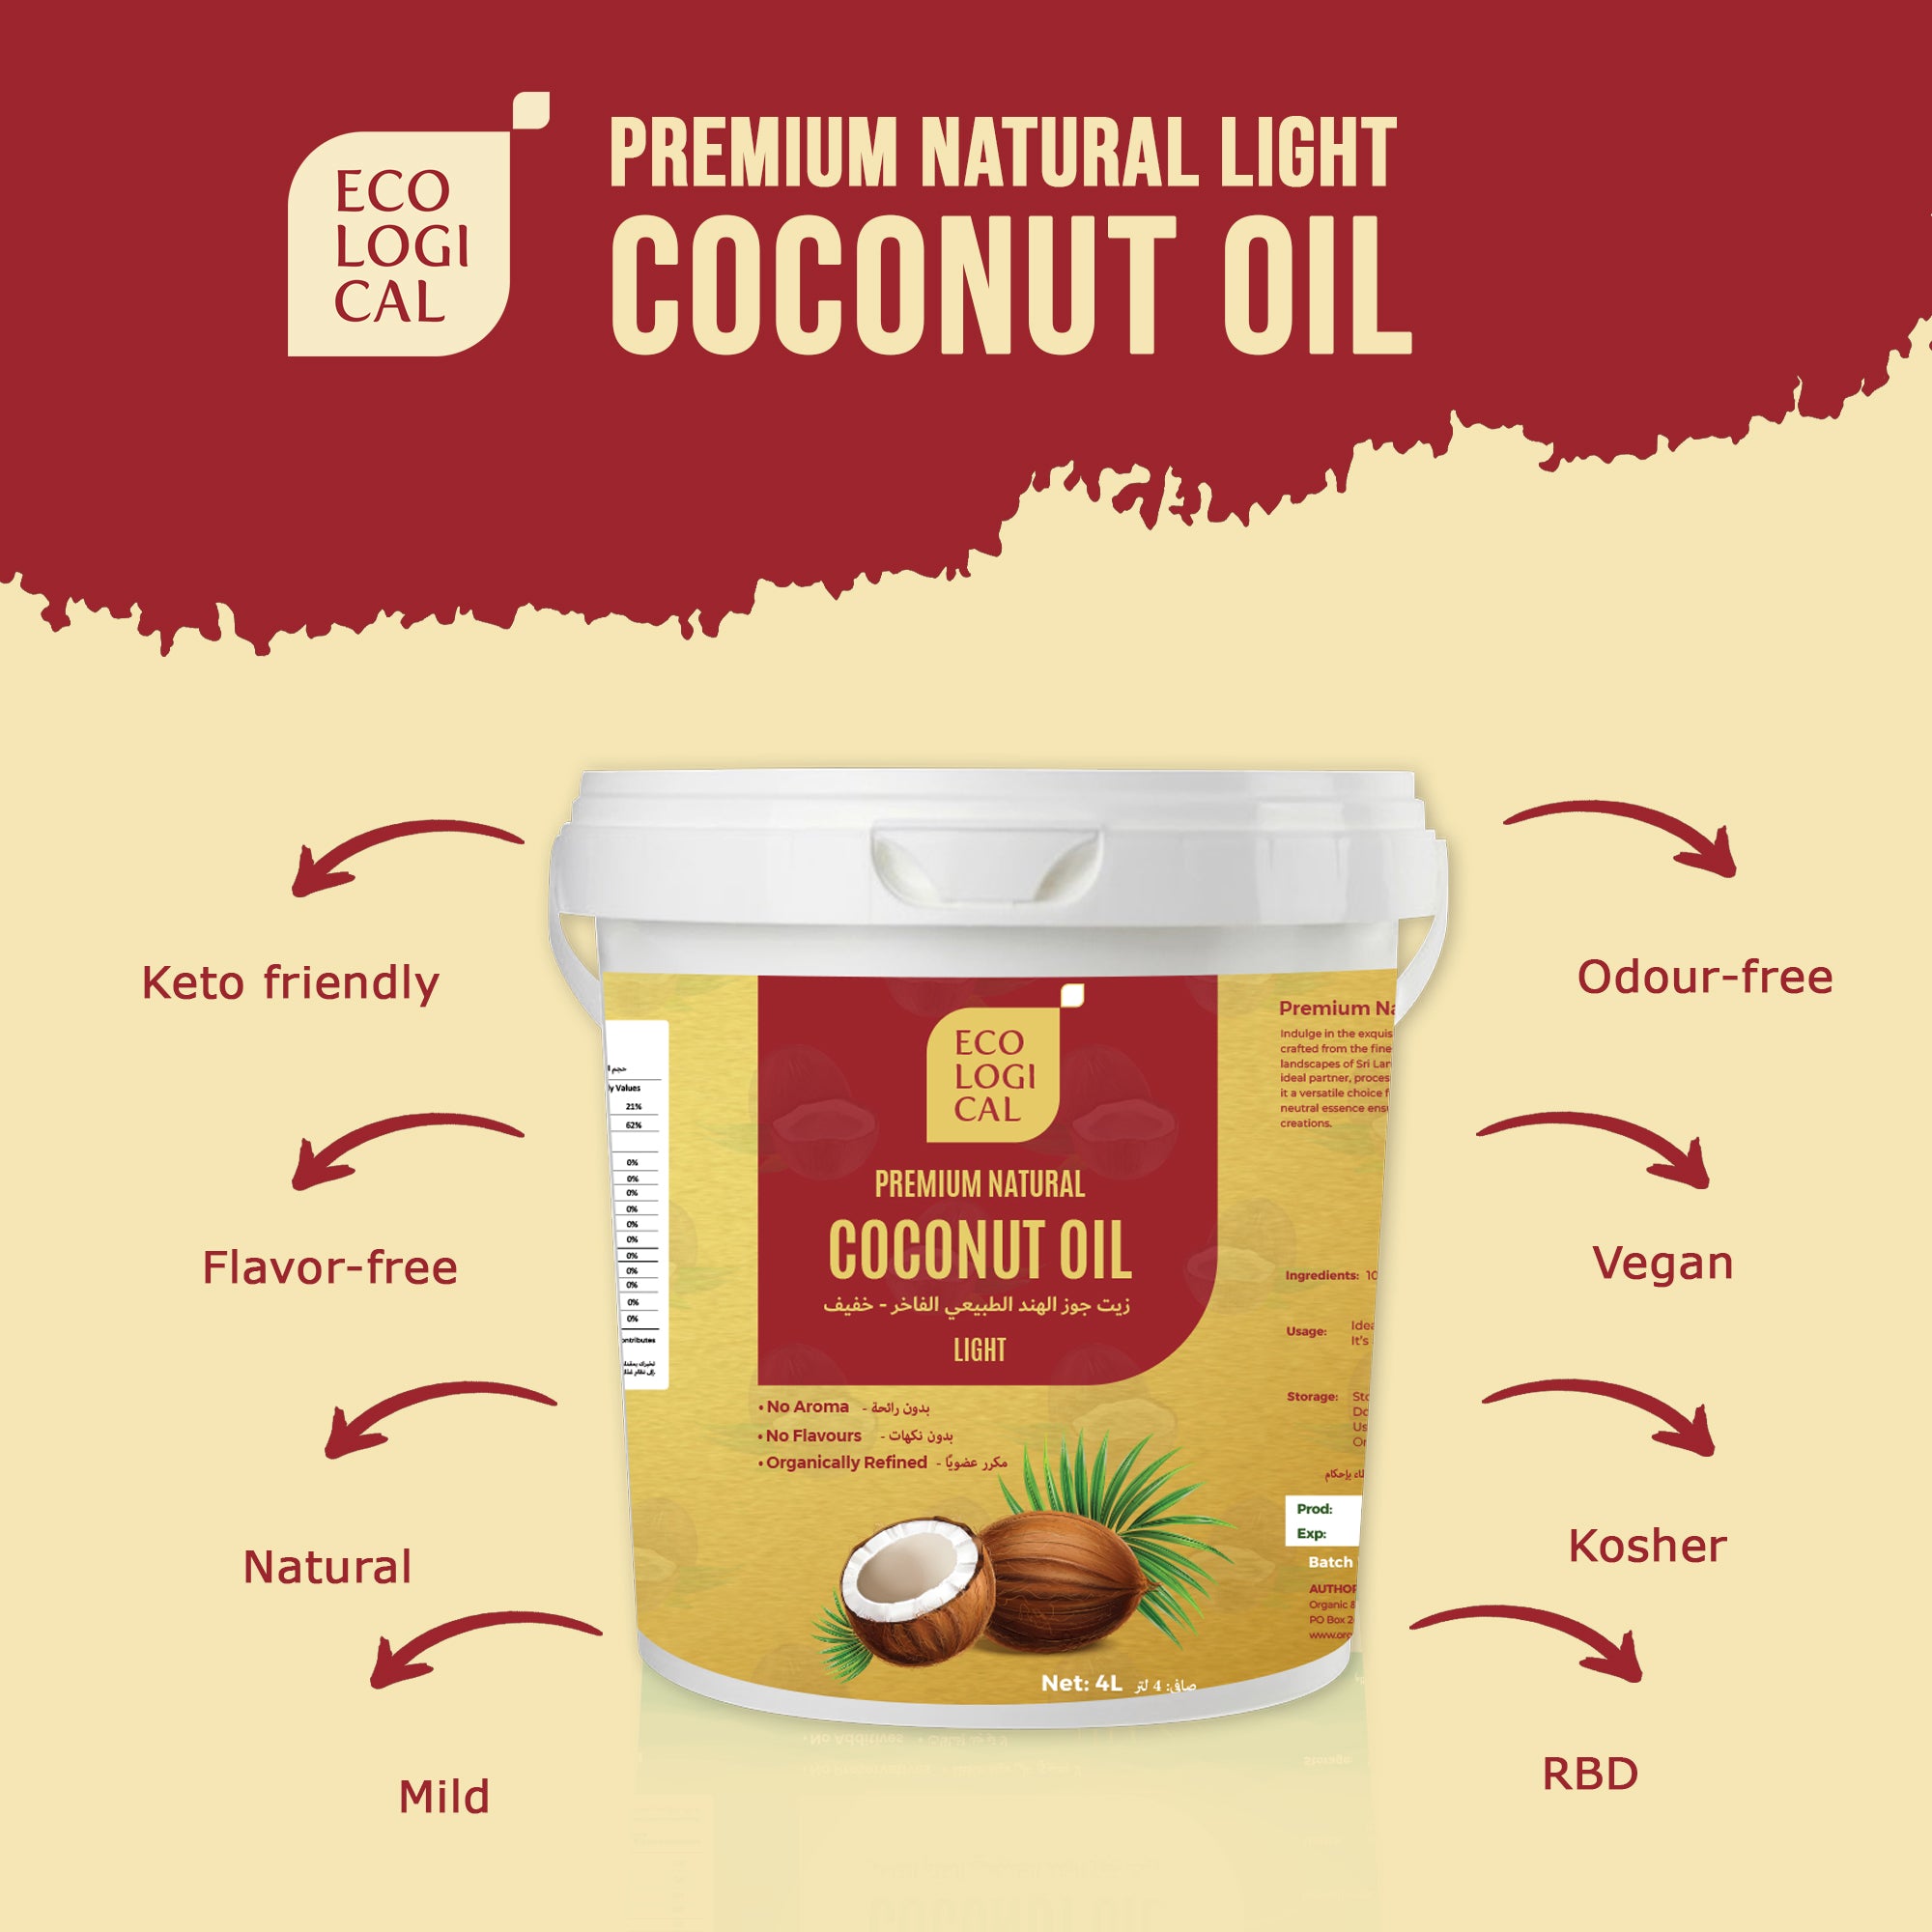 ECOLOGICAL Premium Natural Light Coconut Oil - 4L Tub | Mild, Flavourless, Odourless and Sustainably Sourced